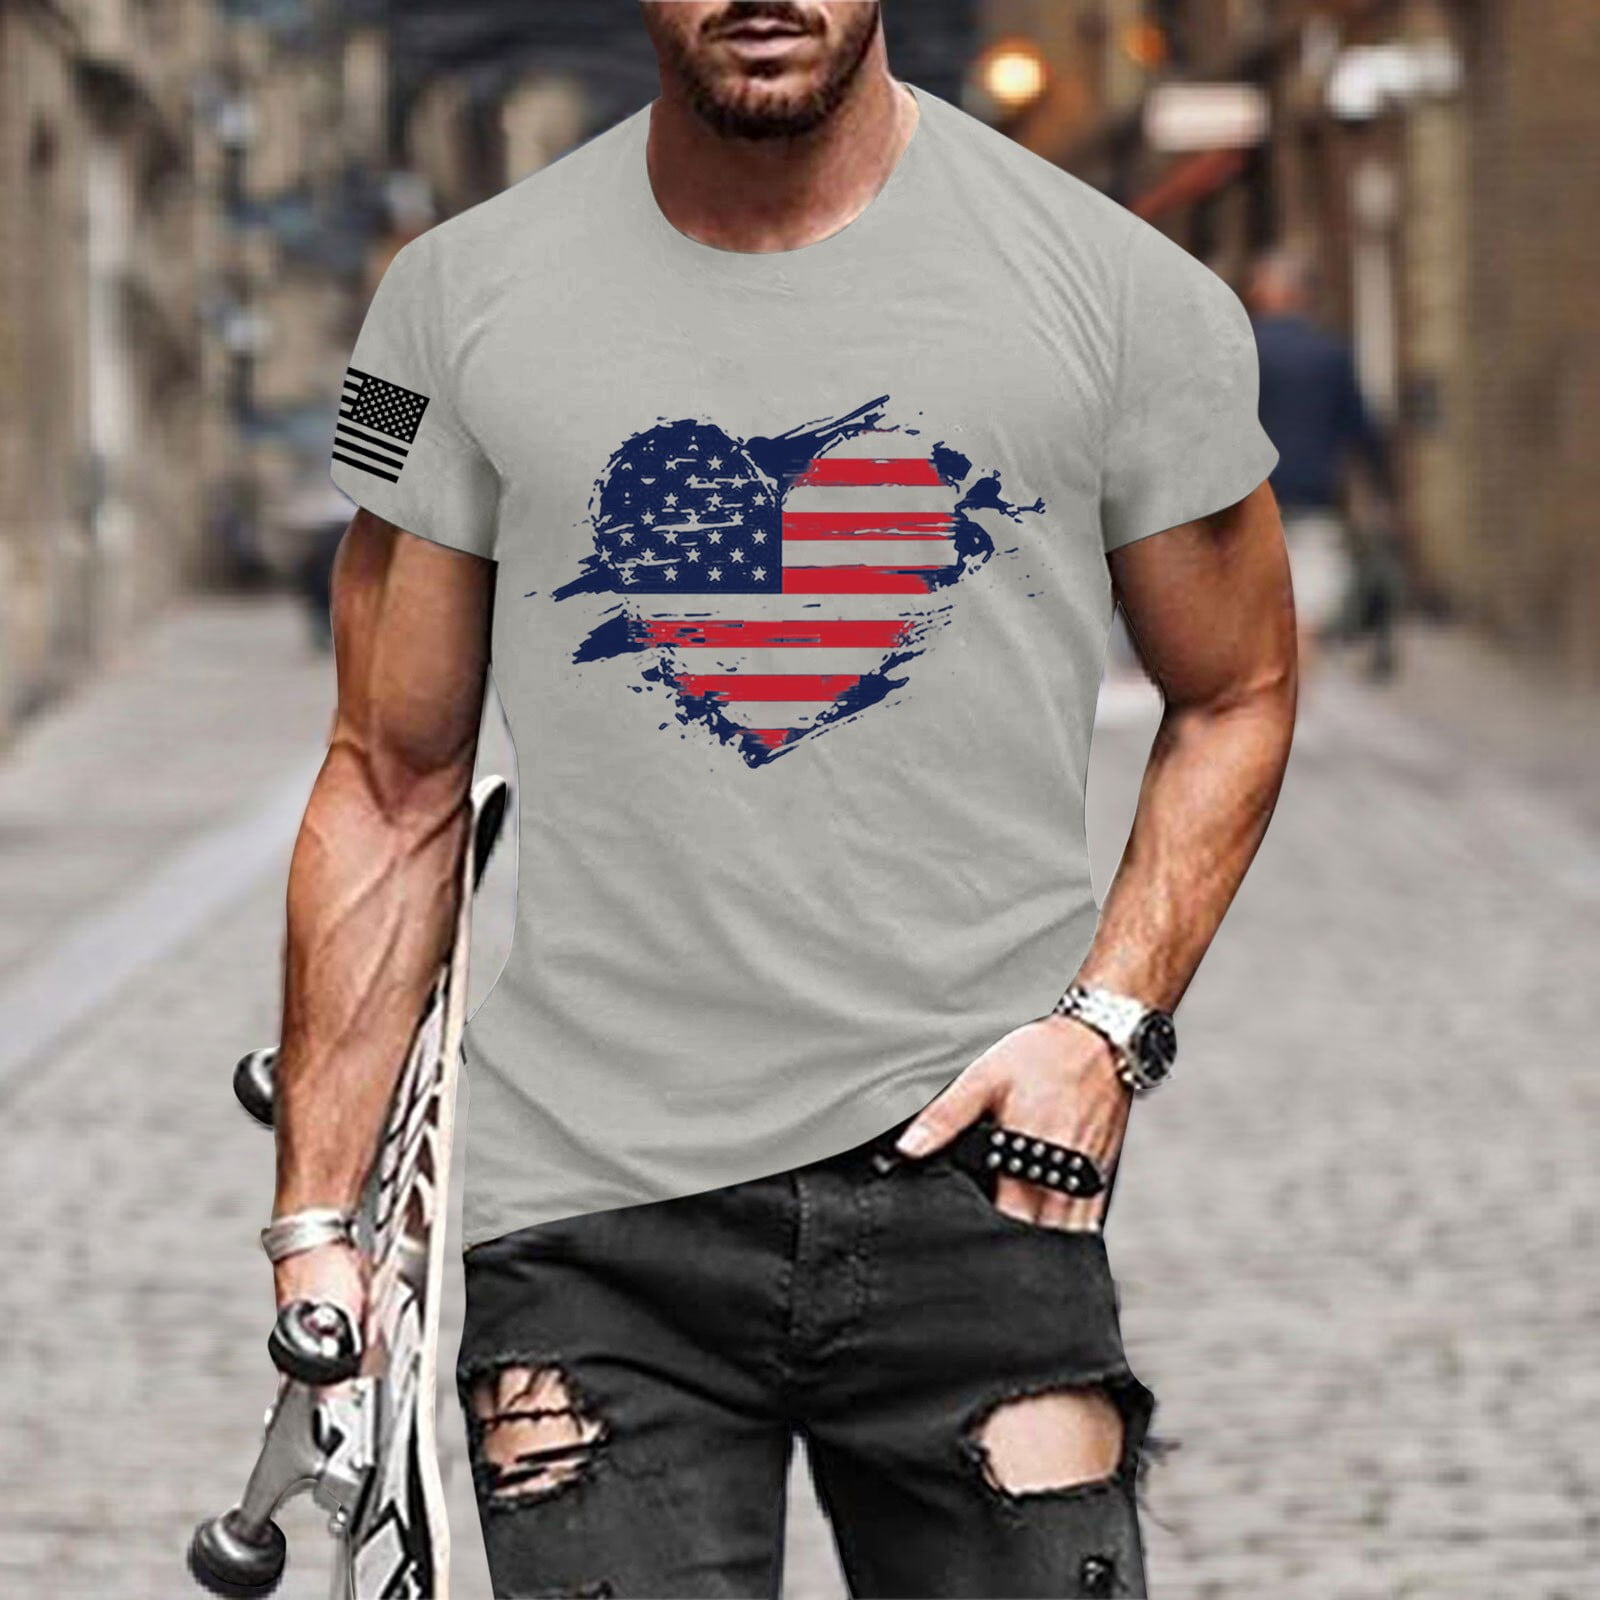 JHLZHS T Shirts for Men with Pocket Work Mens Summer Independence Day  Fashion Casual Printed T Shirt Short Sleeve Black T Shirts for Men Pack V  Neck ...